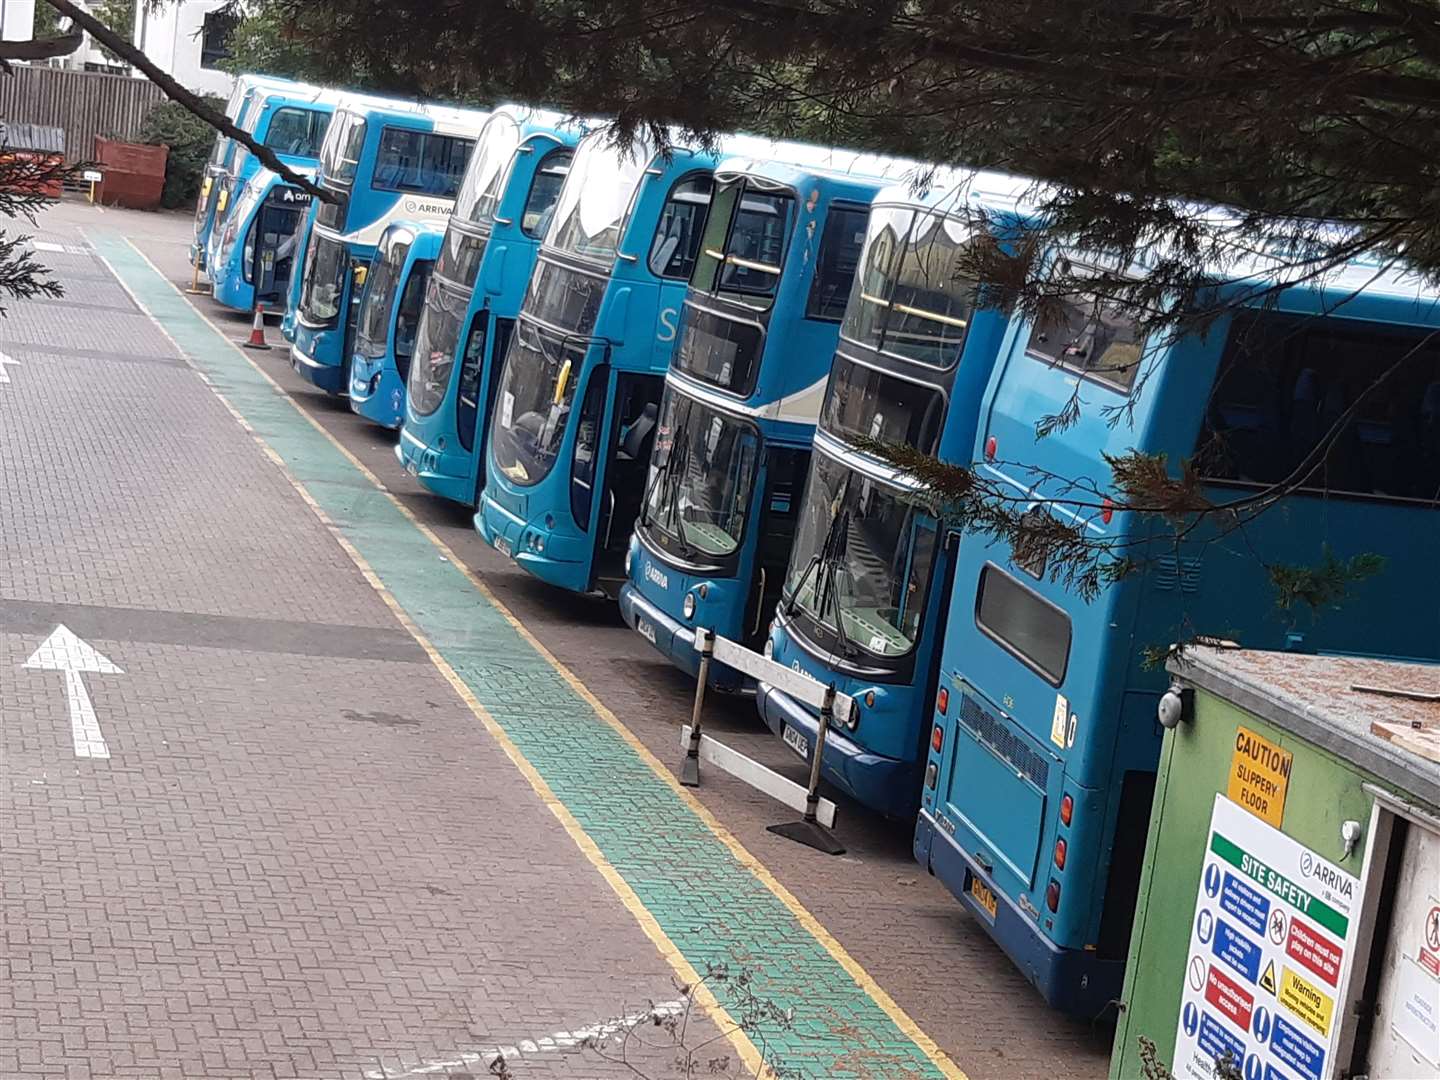 There are 600 Arriva bus drivers going on strike this week